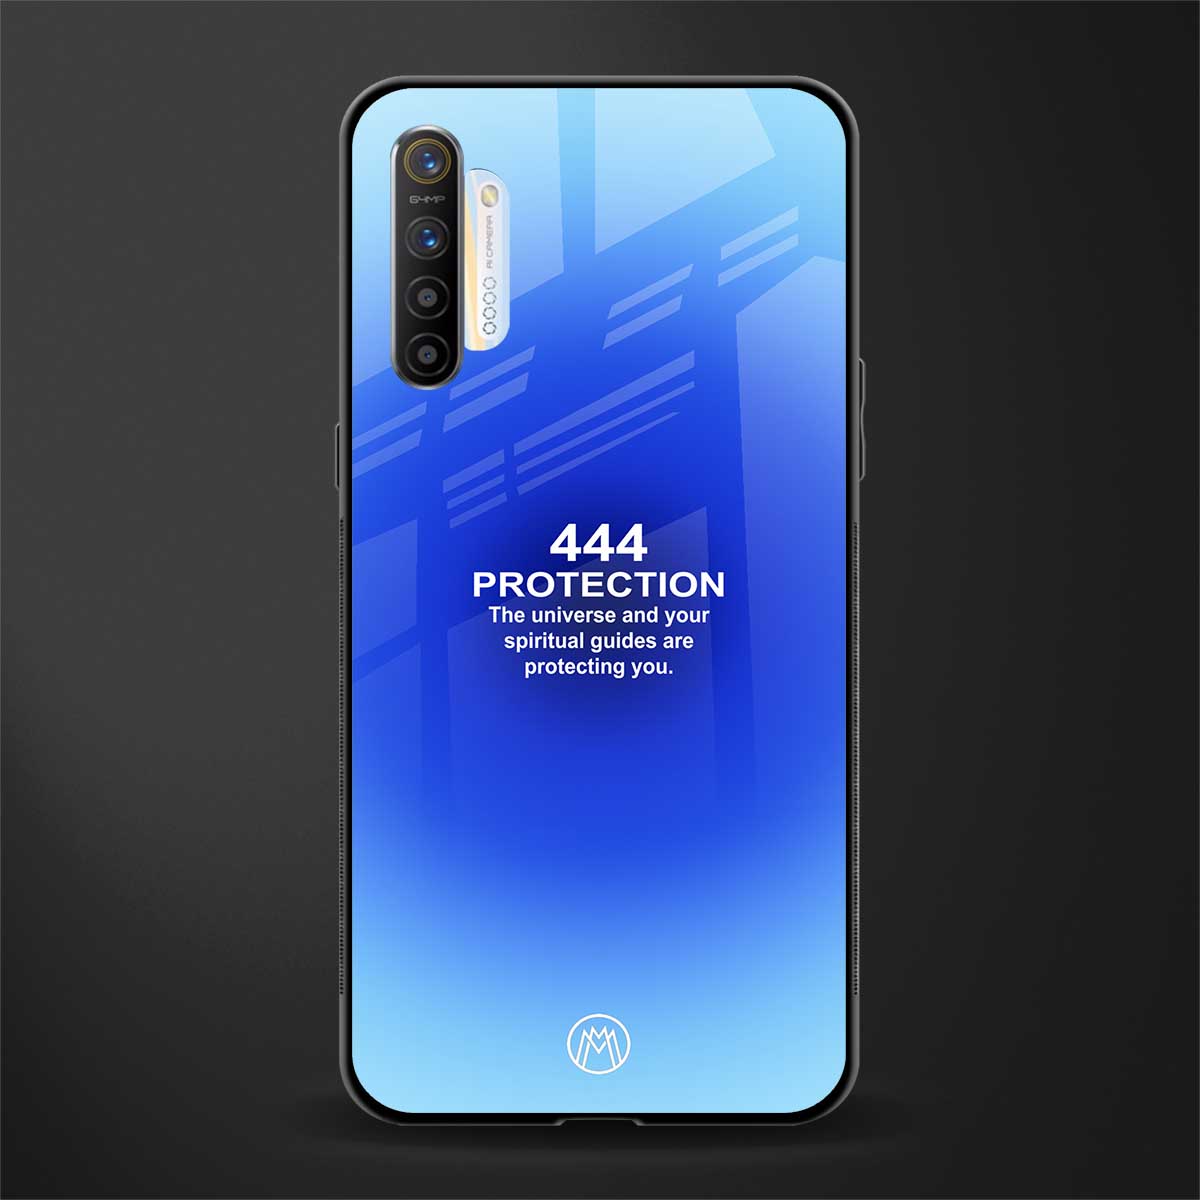 444 protection glass case for realme xt image